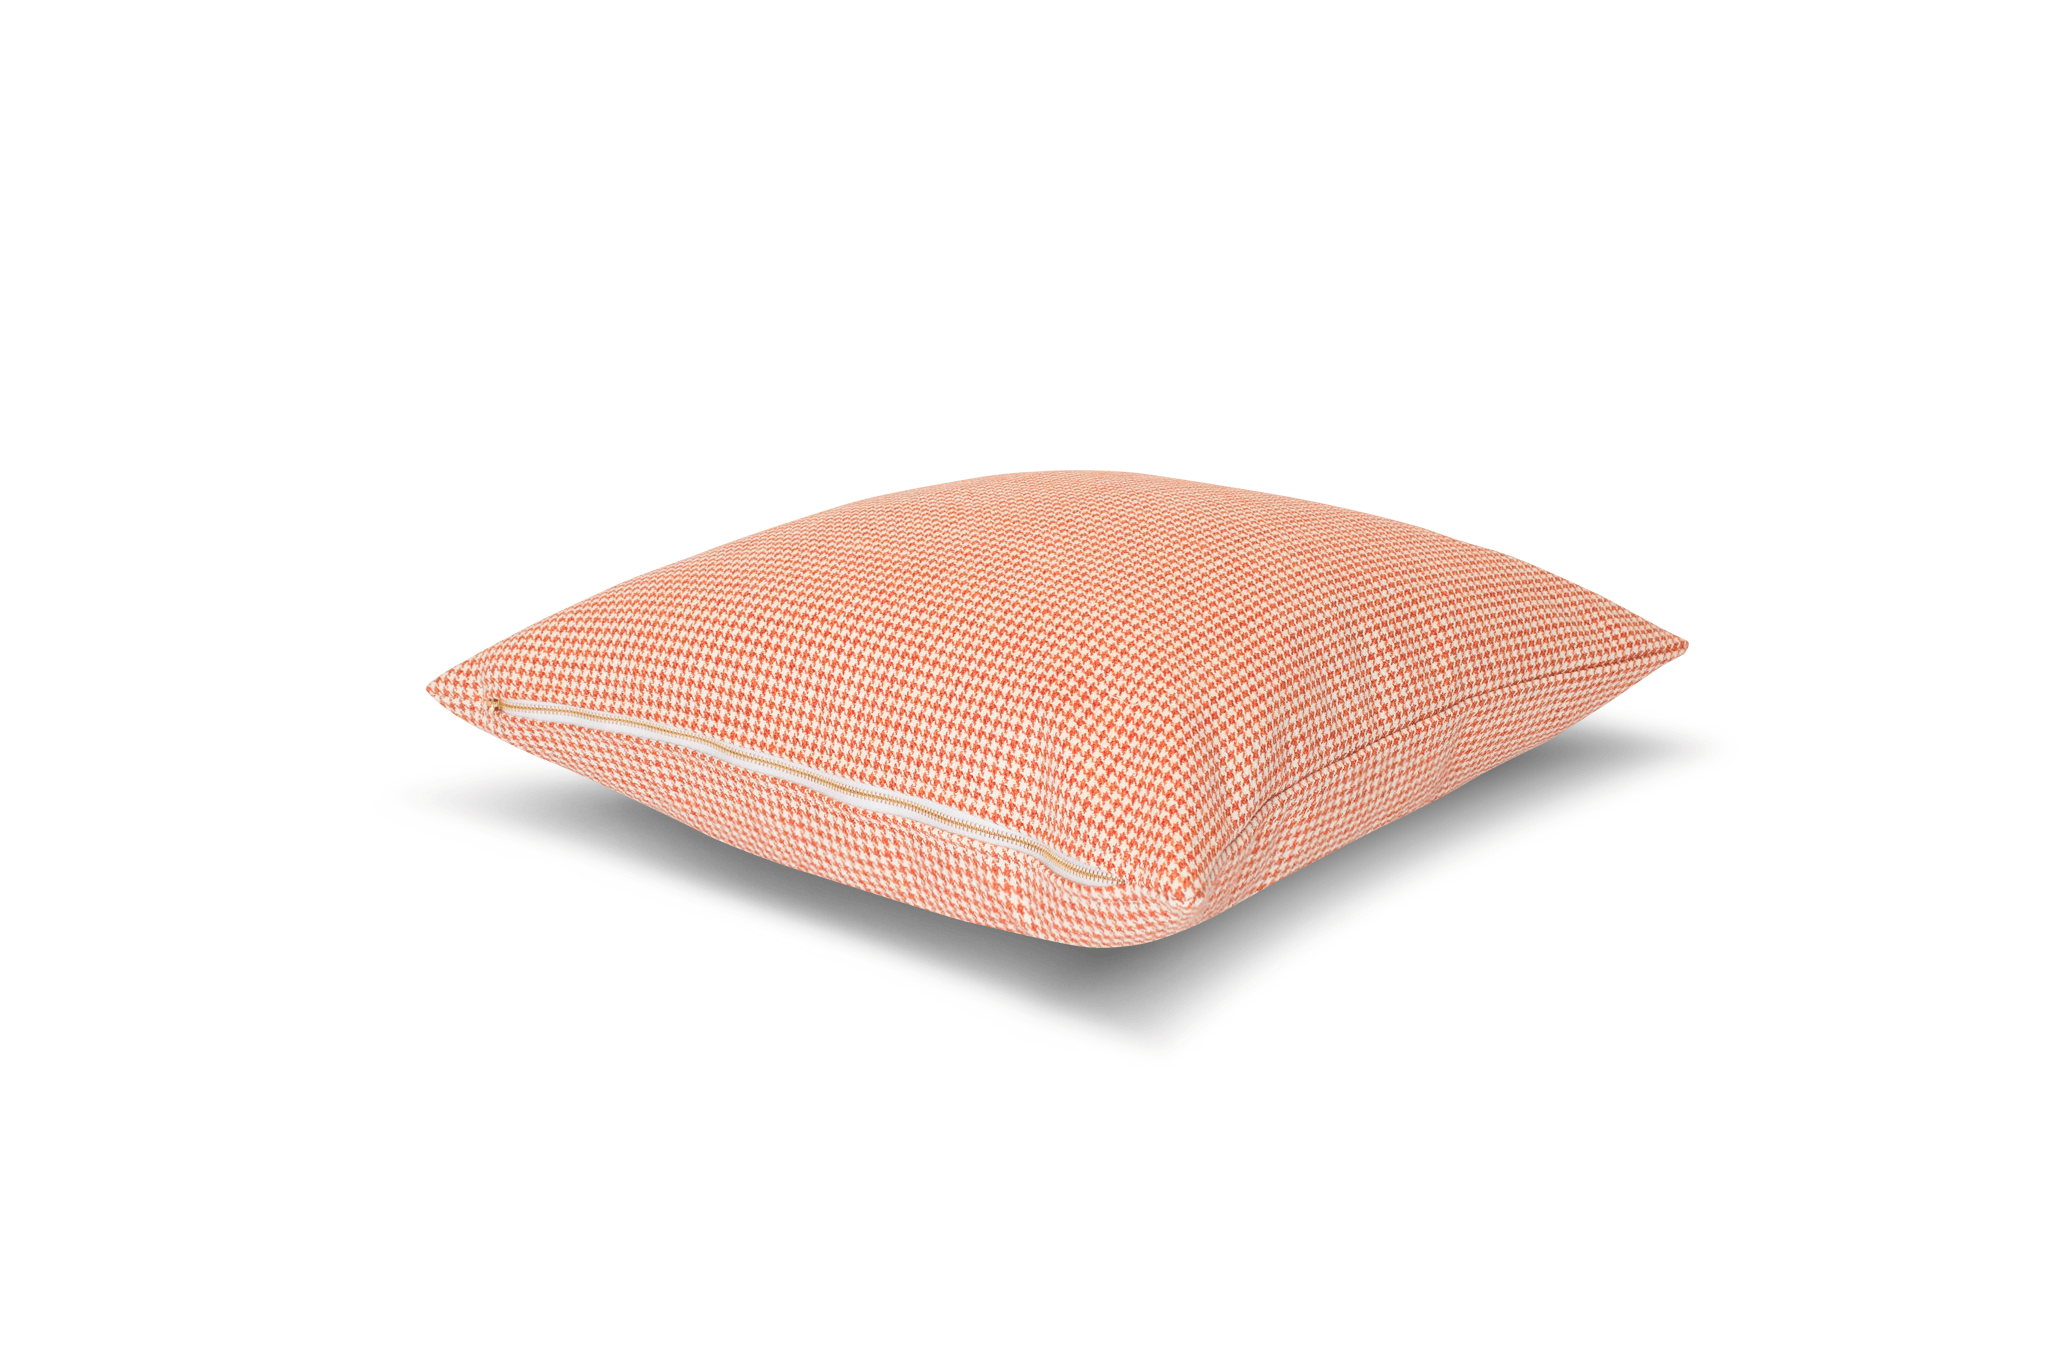 Koi Houndstooth Cushion Cover Cushion Cover Canadian Down & Feather Company 